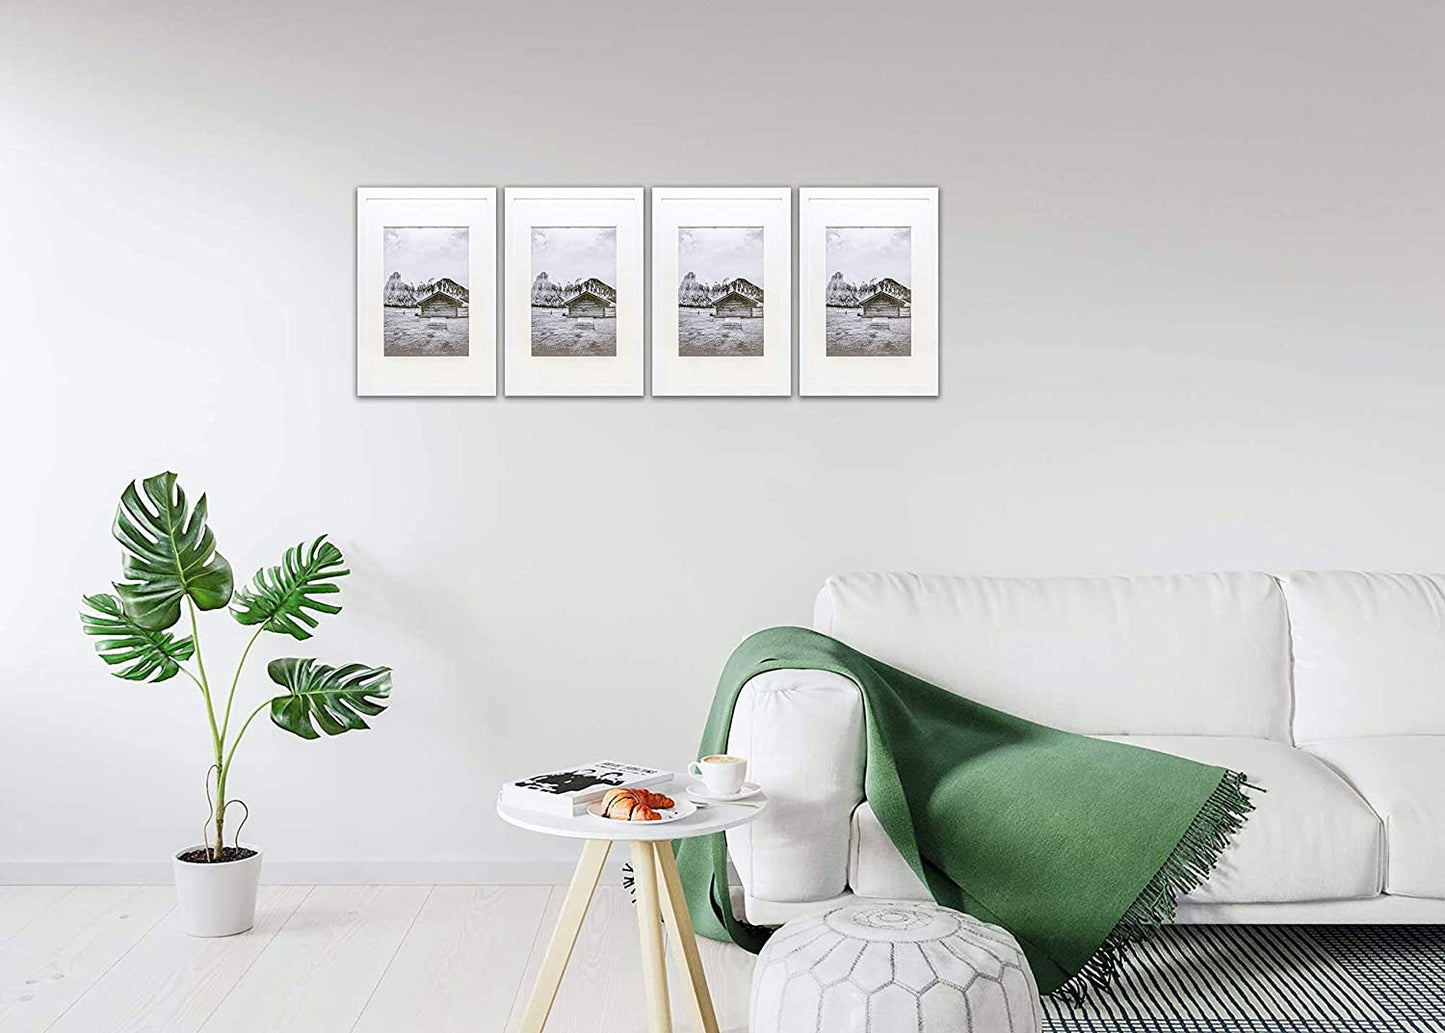 12" x 16" White Pine Wood 4 Pack Picture Frames, 8" x 12" Matted